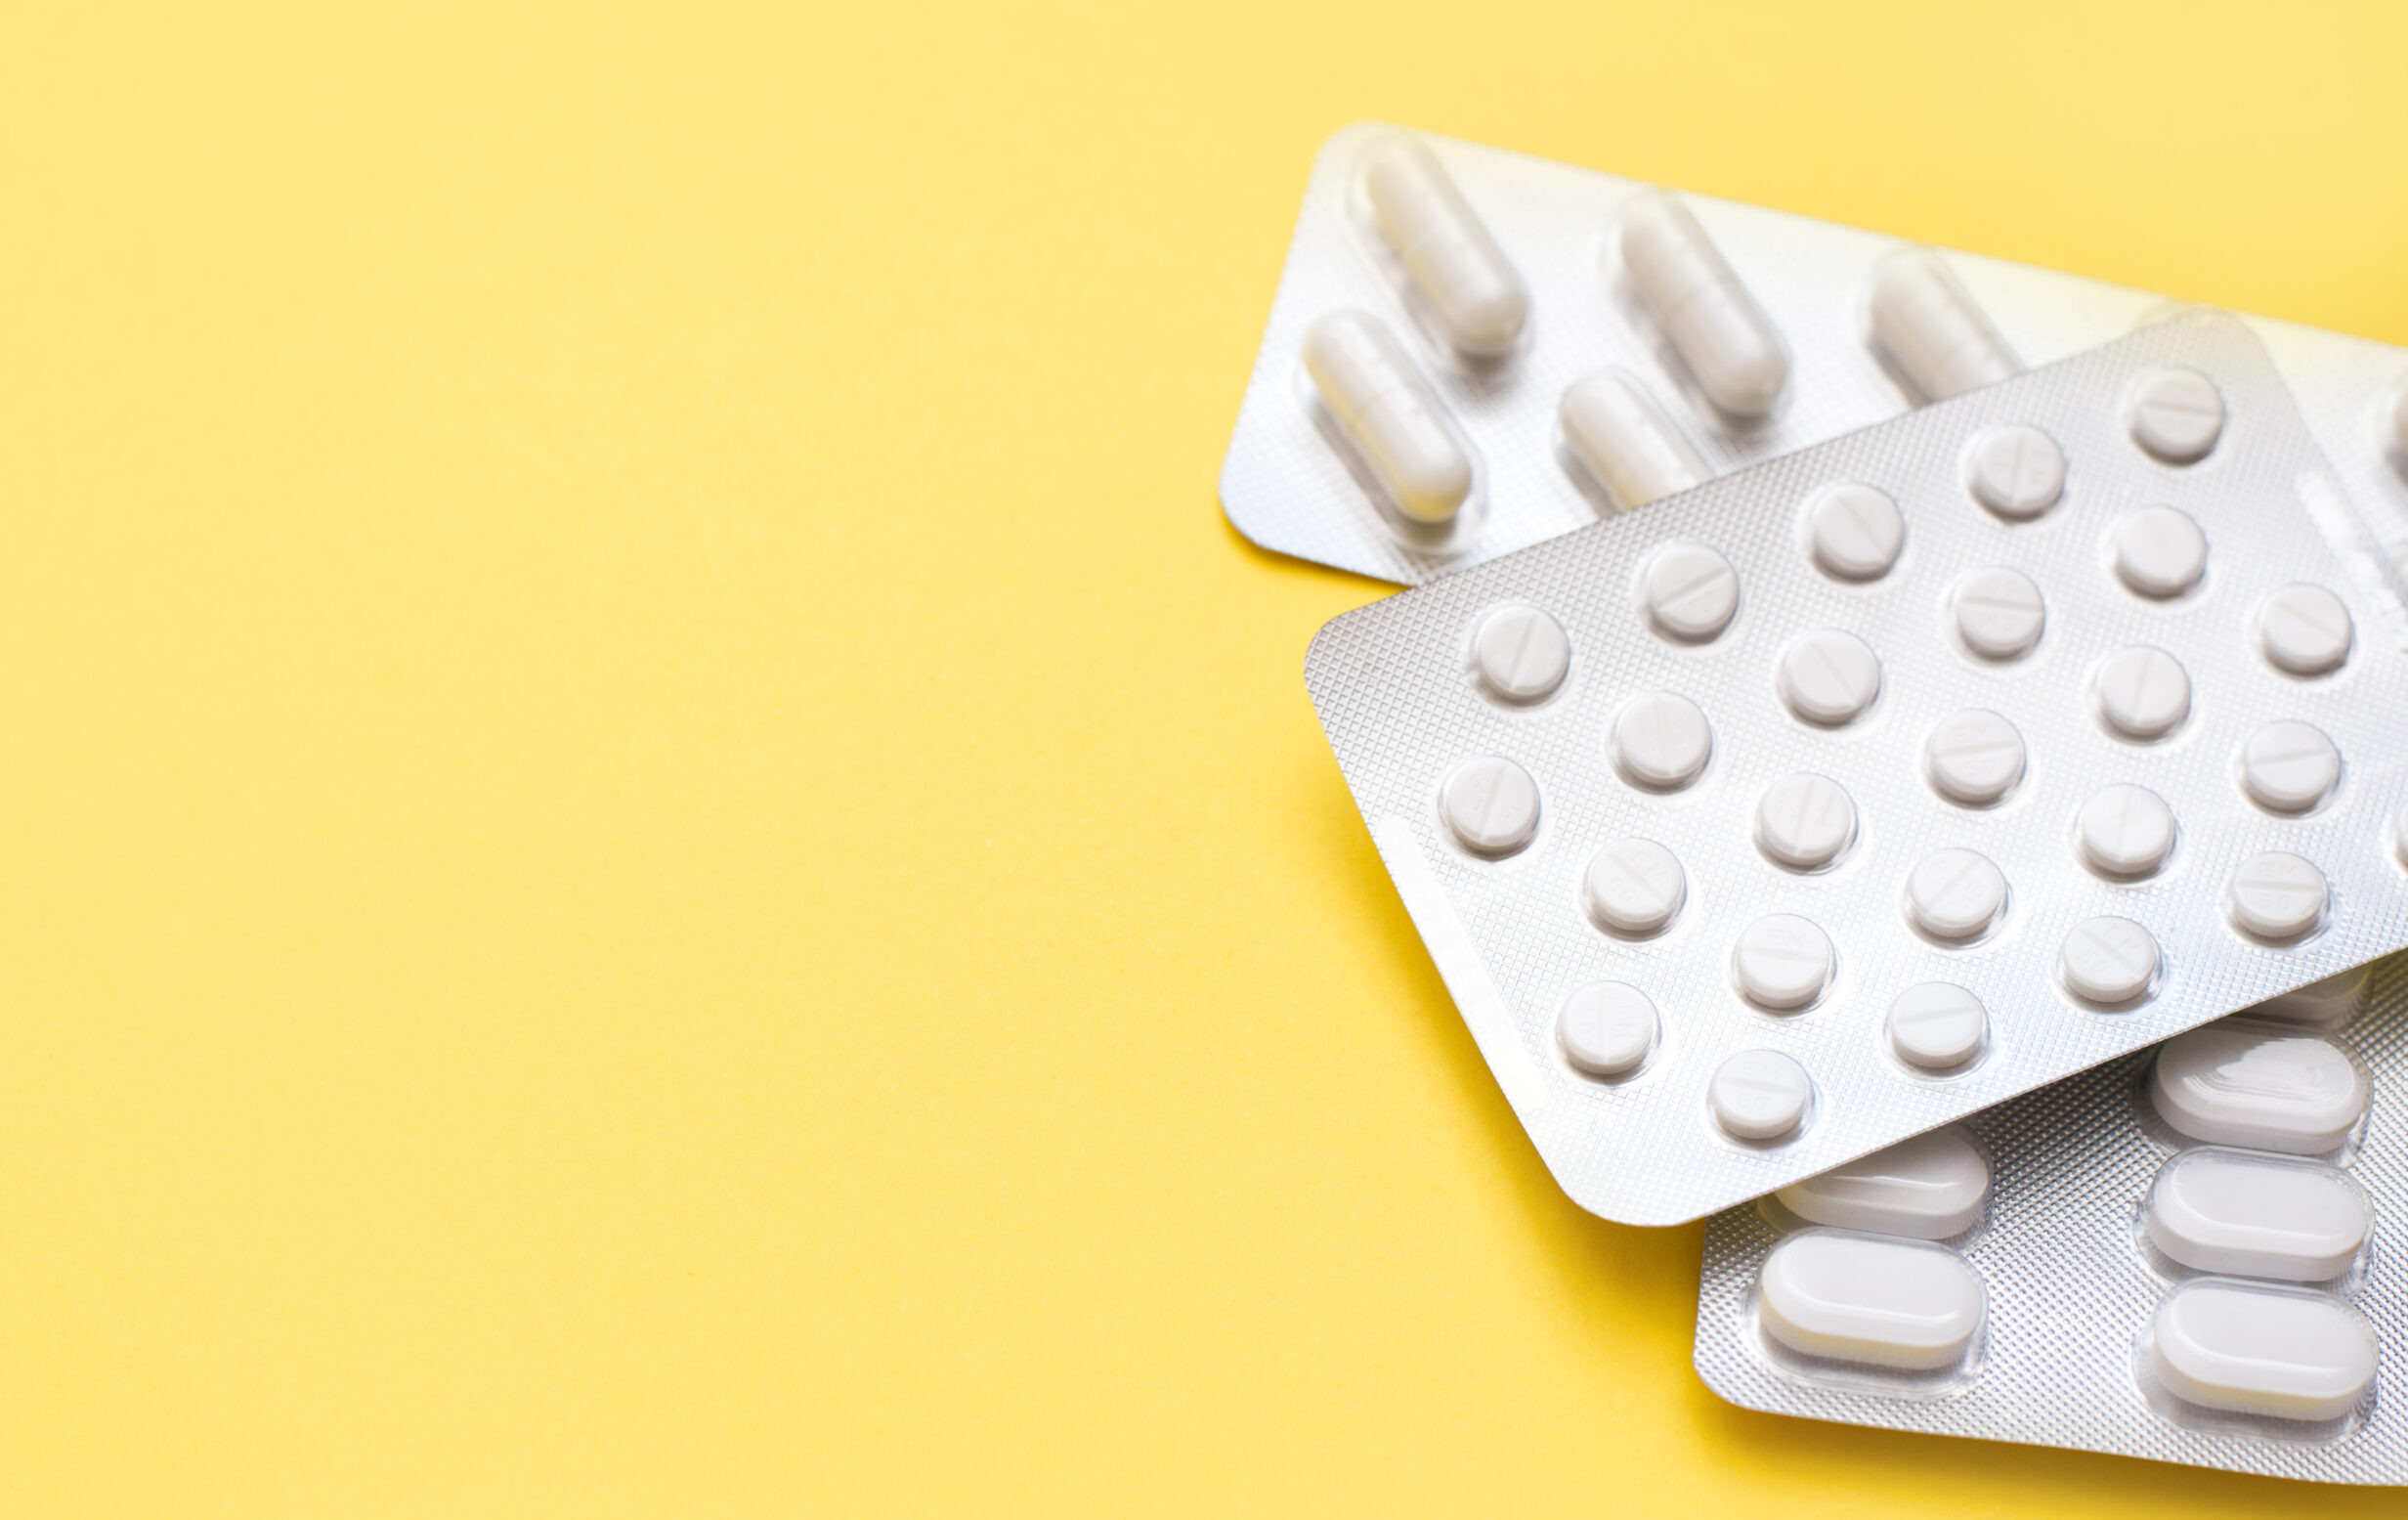 Blisters,With,White,Pills,On,A,Yellow,Spring,Background,With